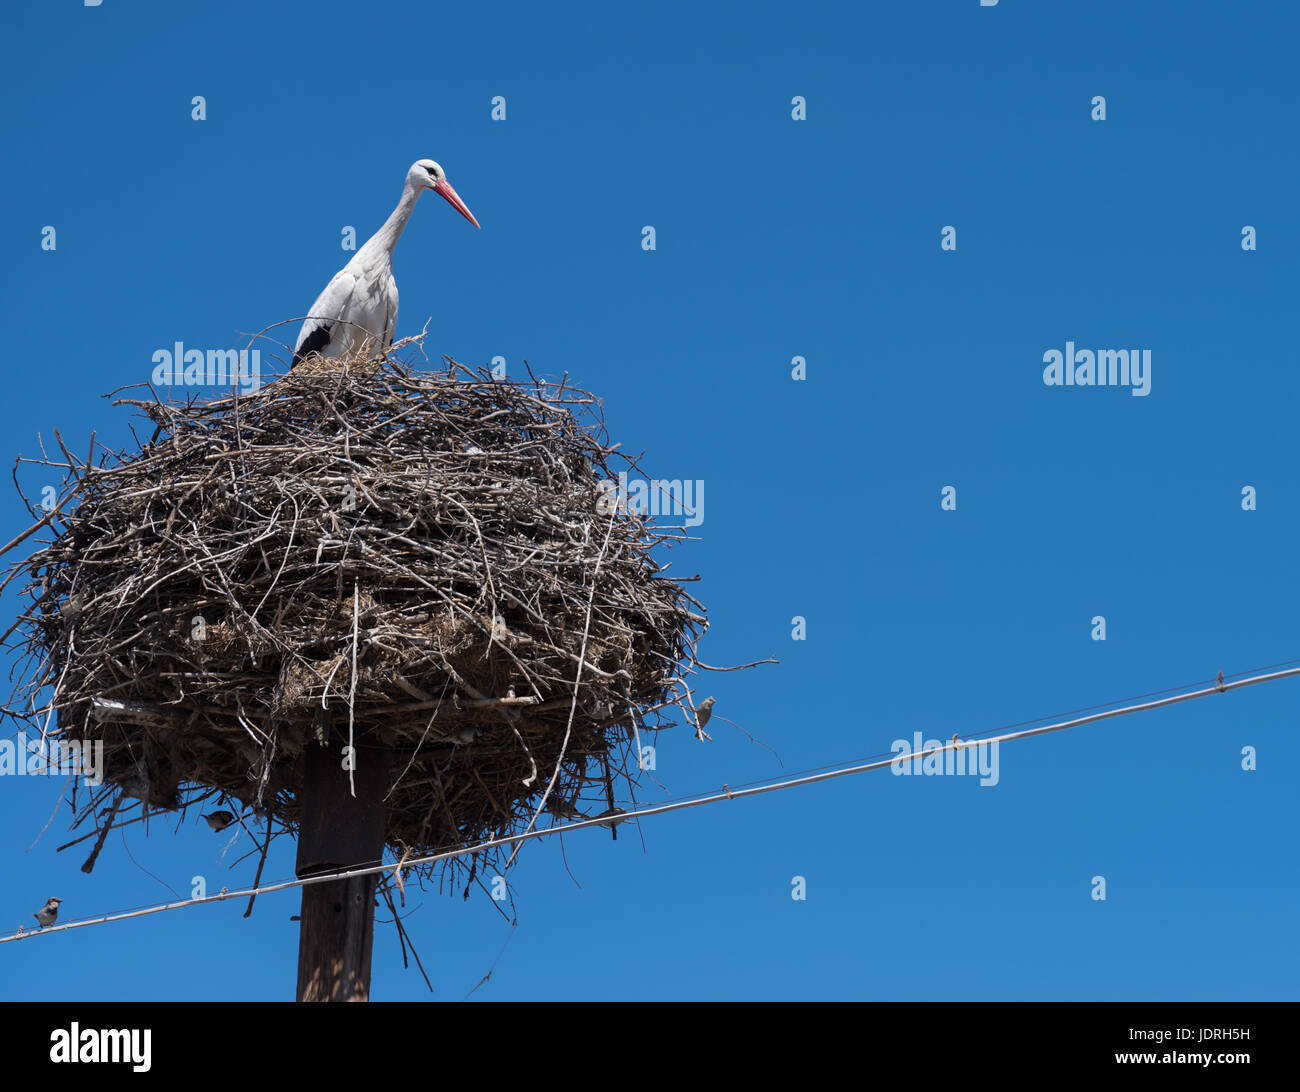 A stork in a nest on top of an electric pole in Southern Armenia Stock Photo